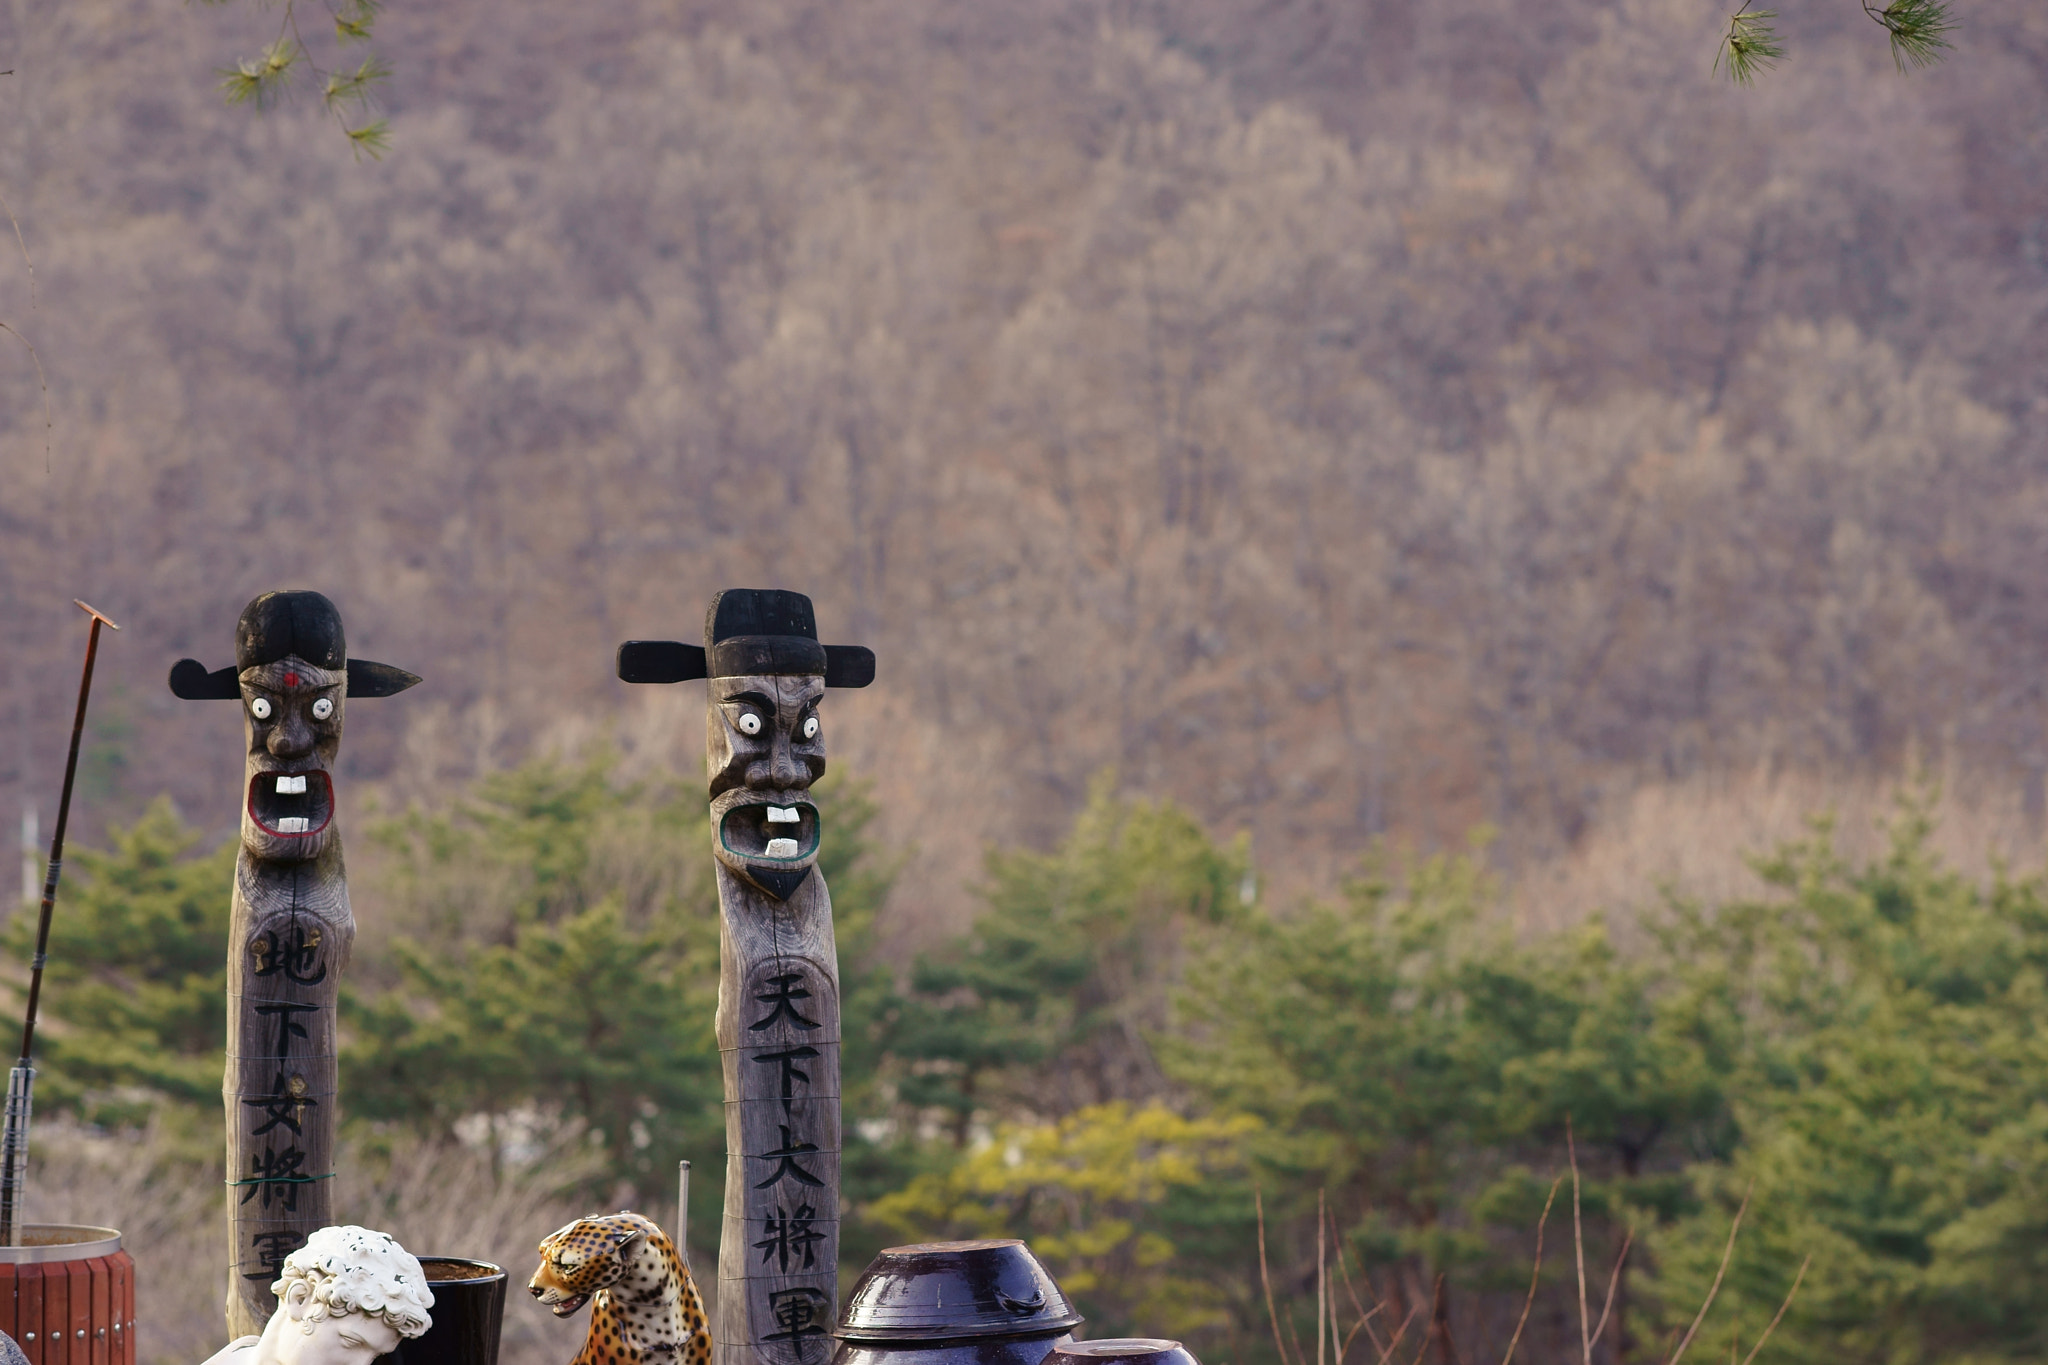 Sony a7 II sample photo. Korean traditional totem pole at the village entrance photography